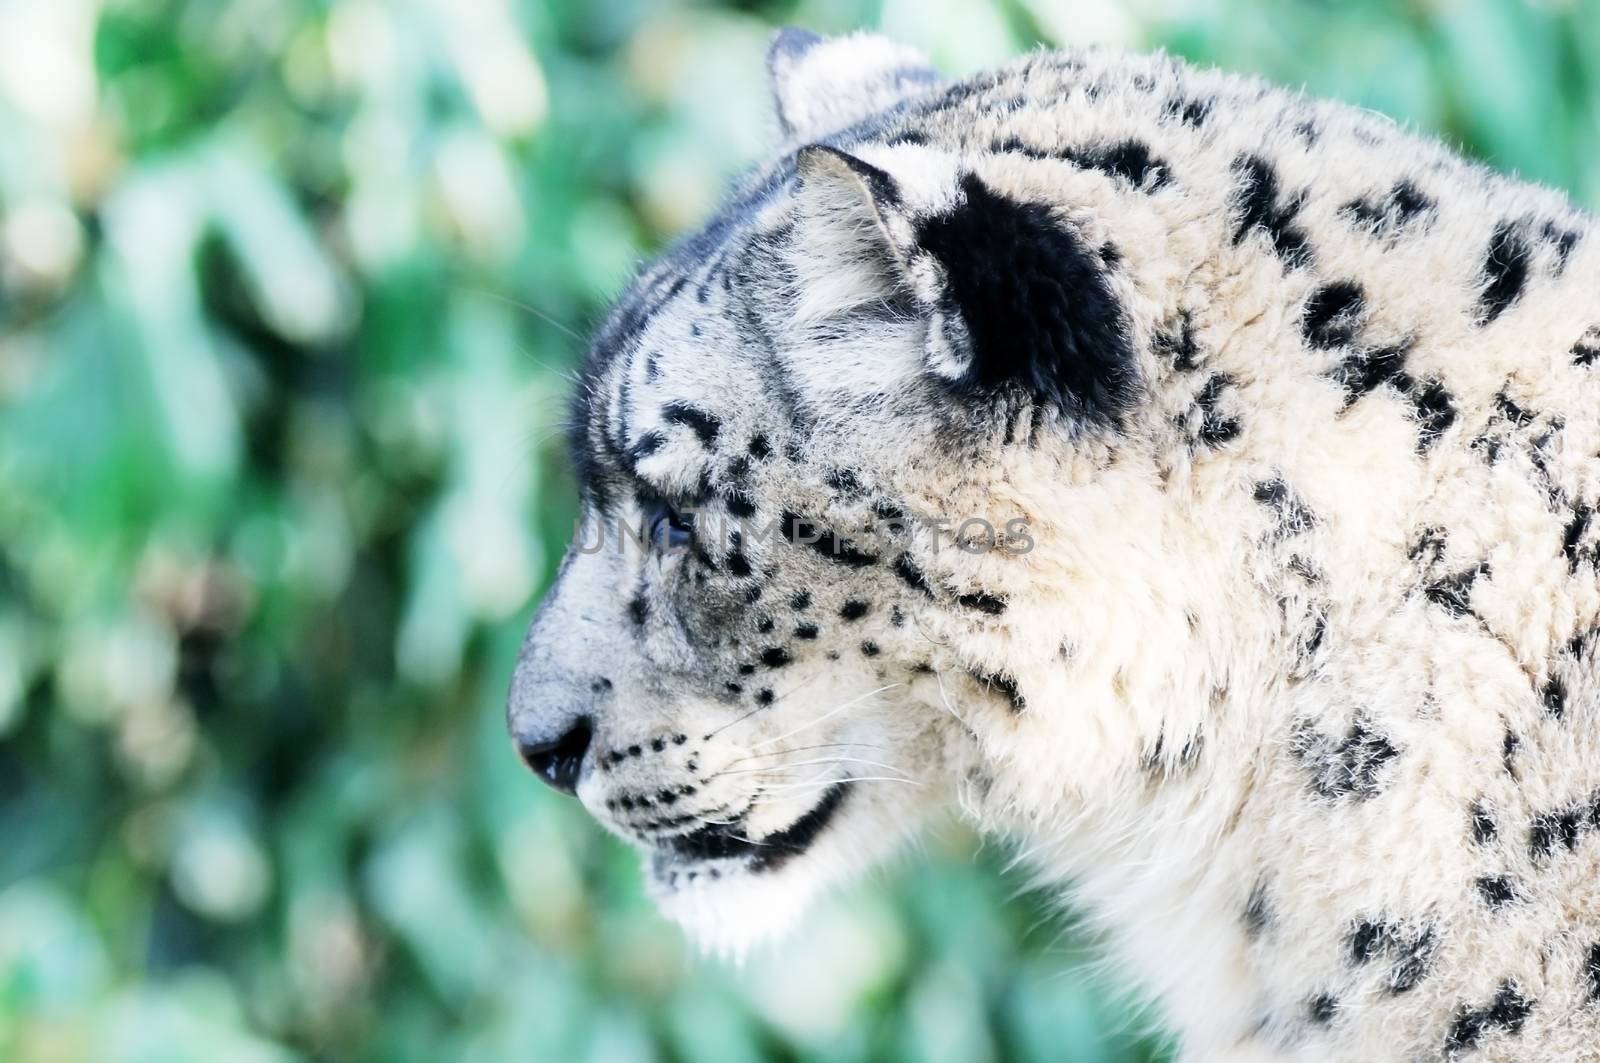 Snow Leopard Profile by kmwphotography